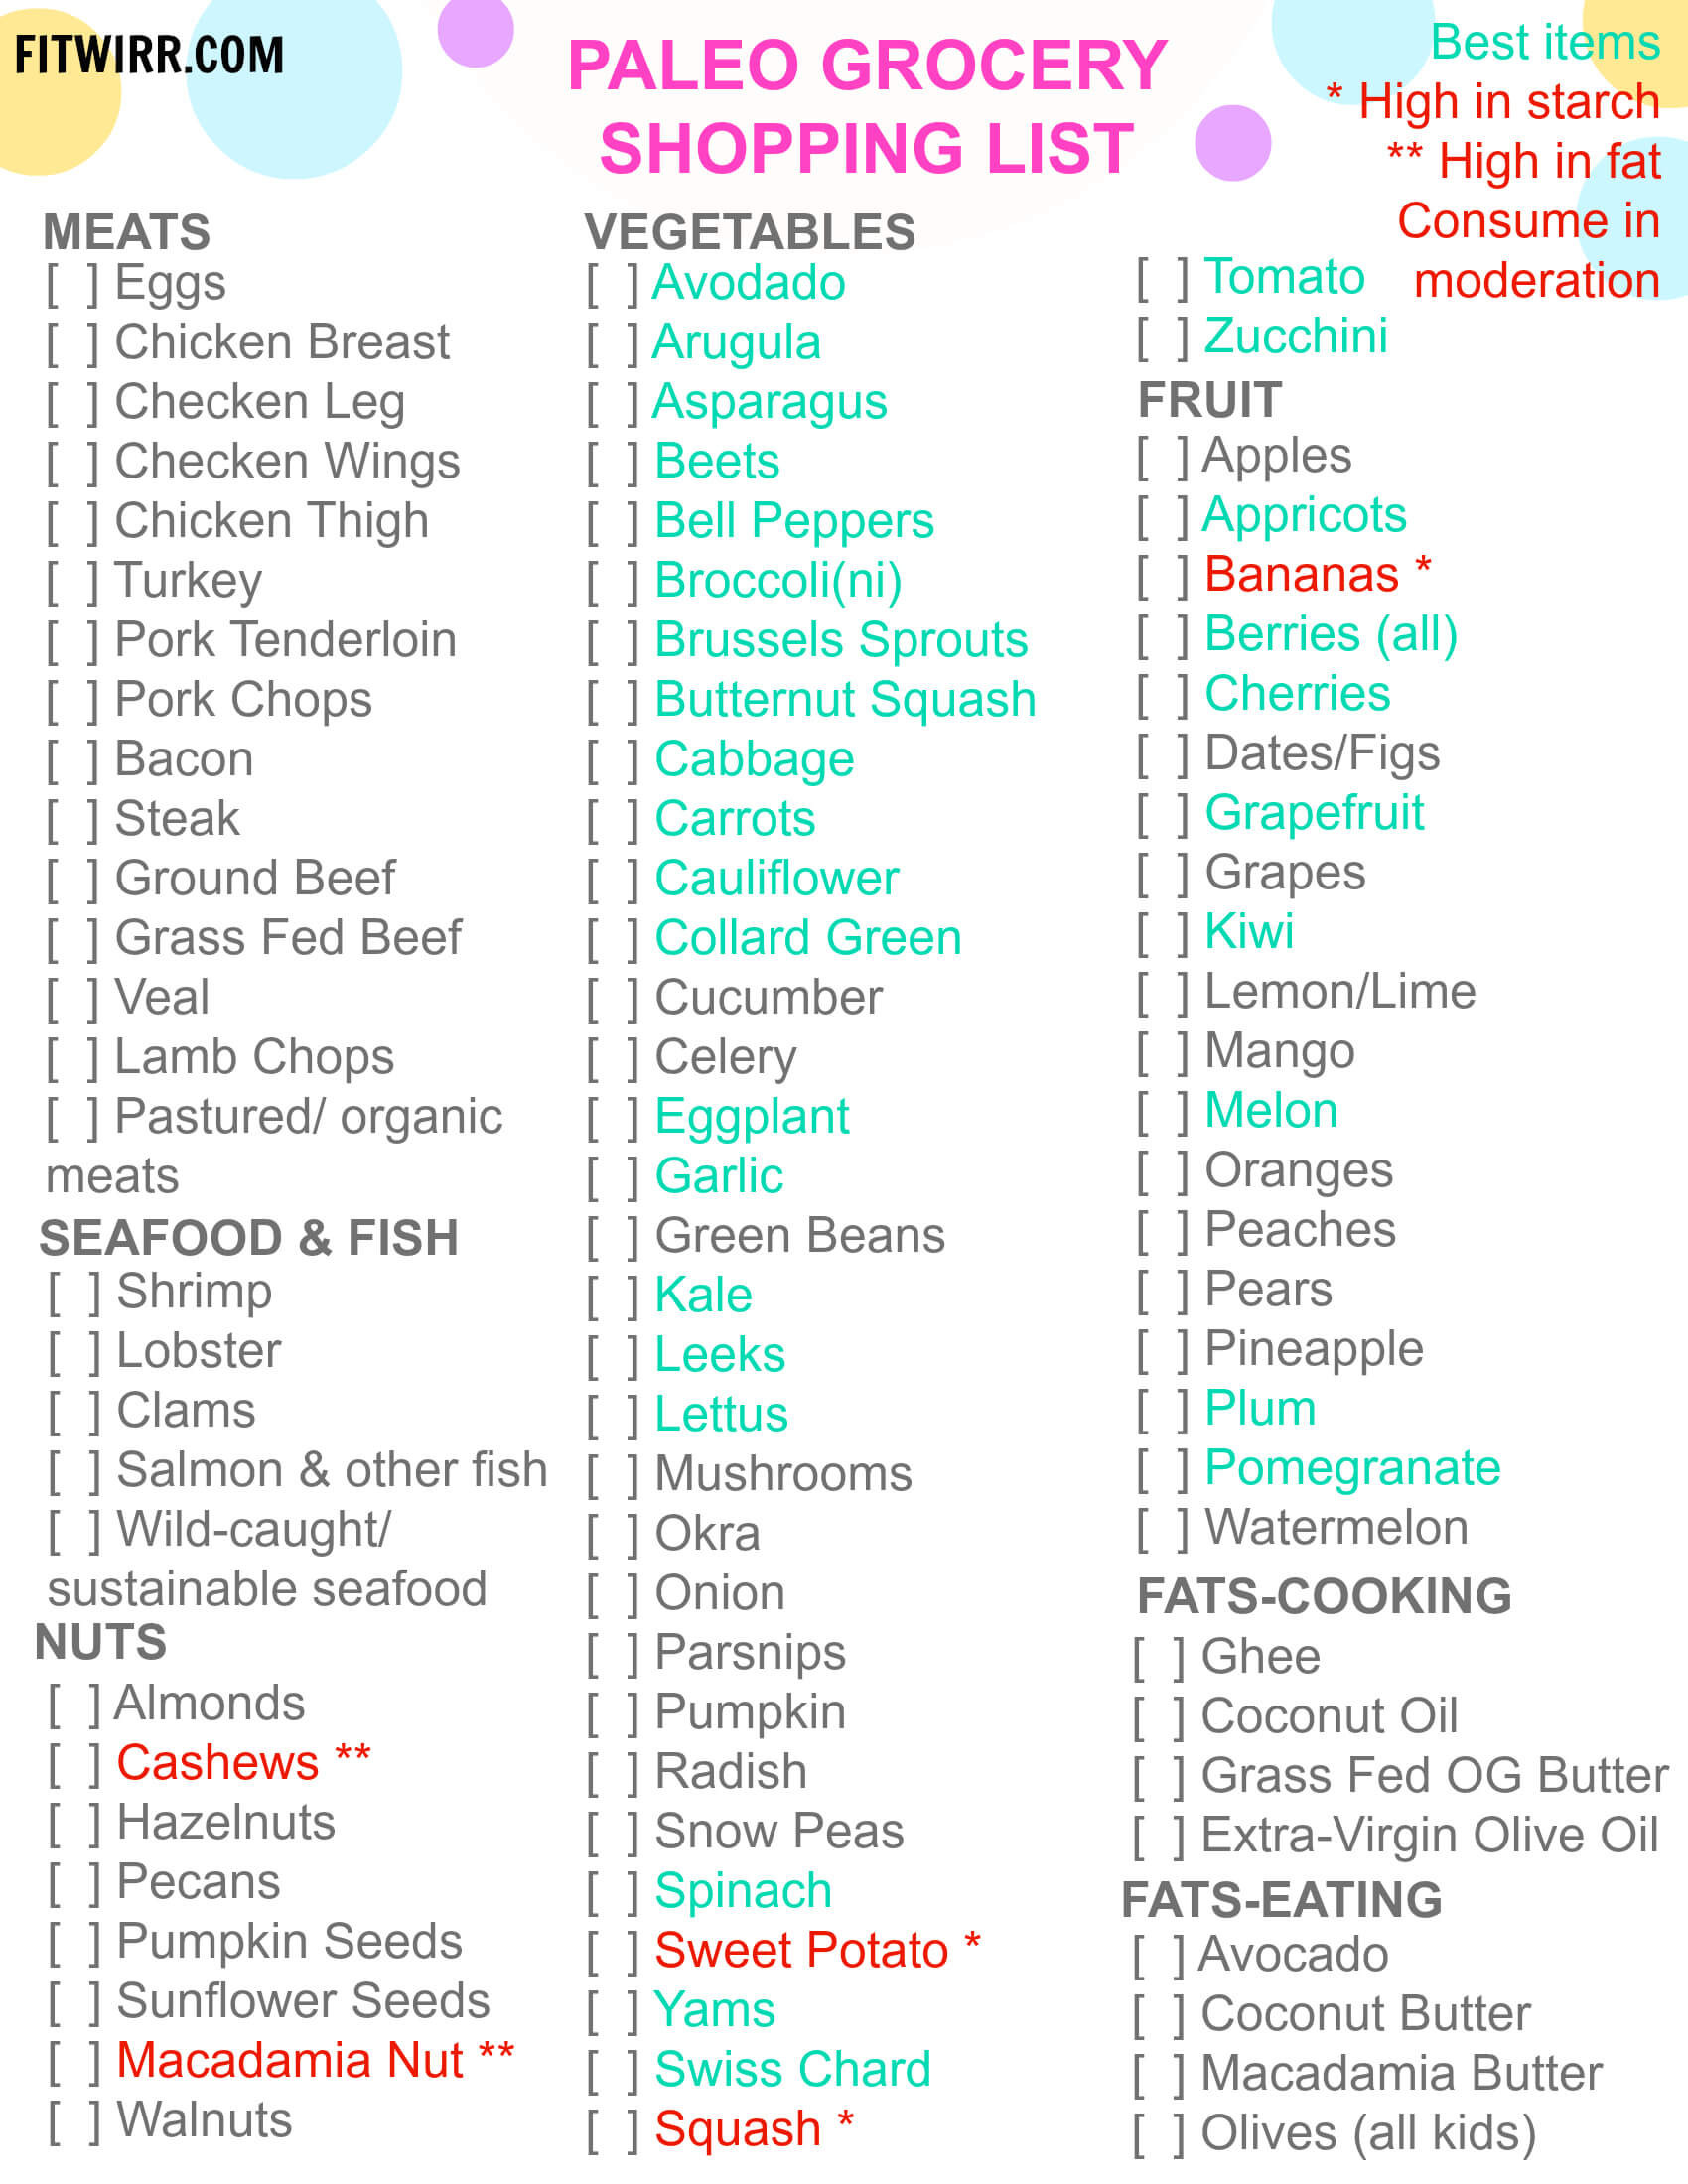 Paleo Diet Grocery List
 Paleo Diet Food List What to Eat and Not to Eat